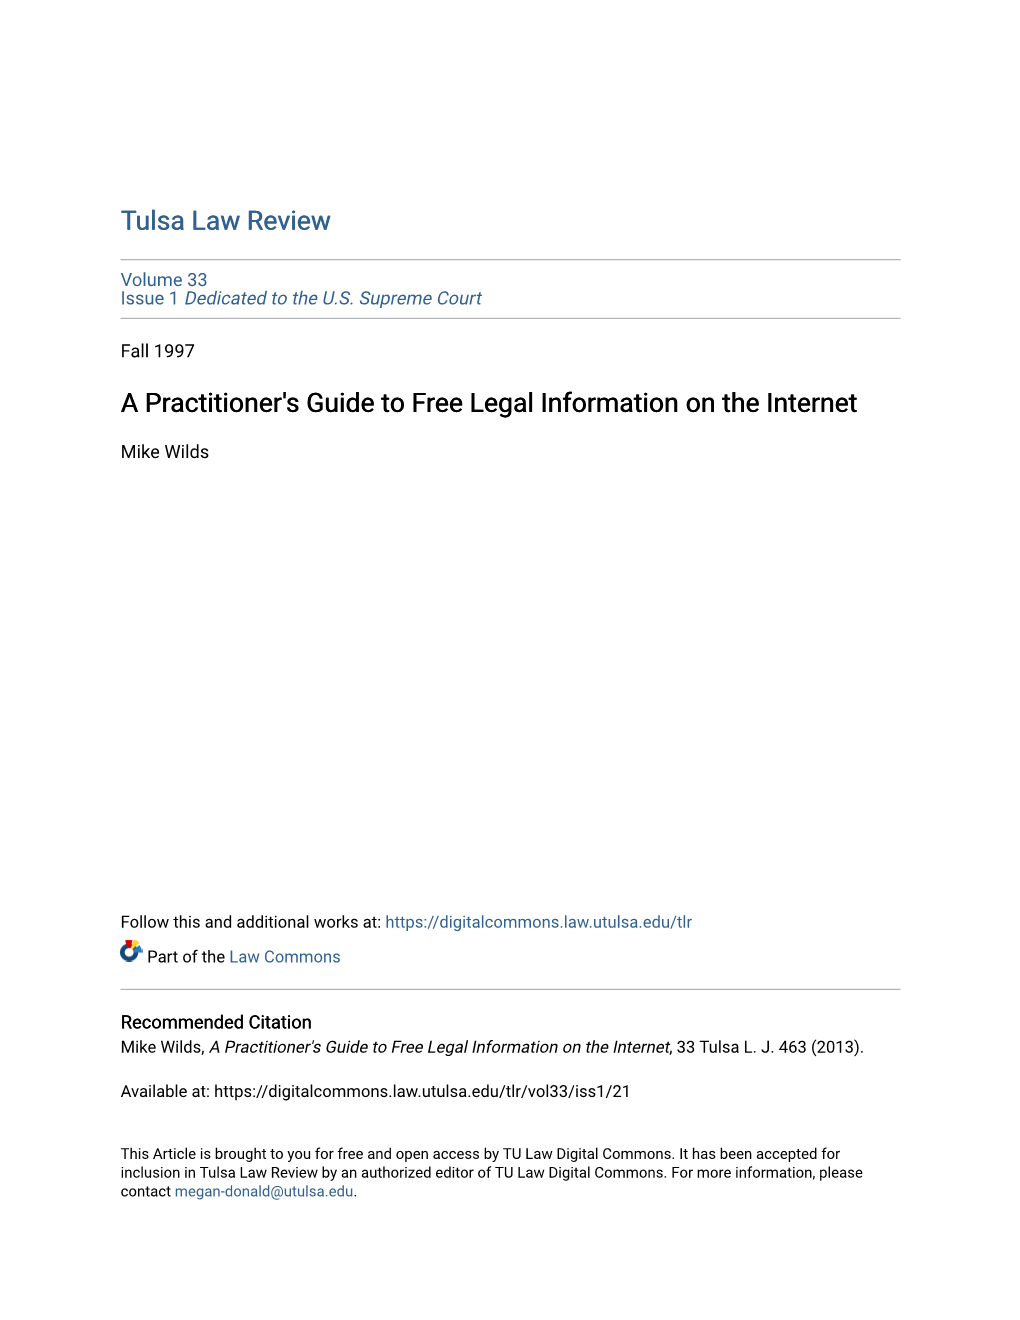 A Practitioner's Guide to Free Legal Information on the Internet